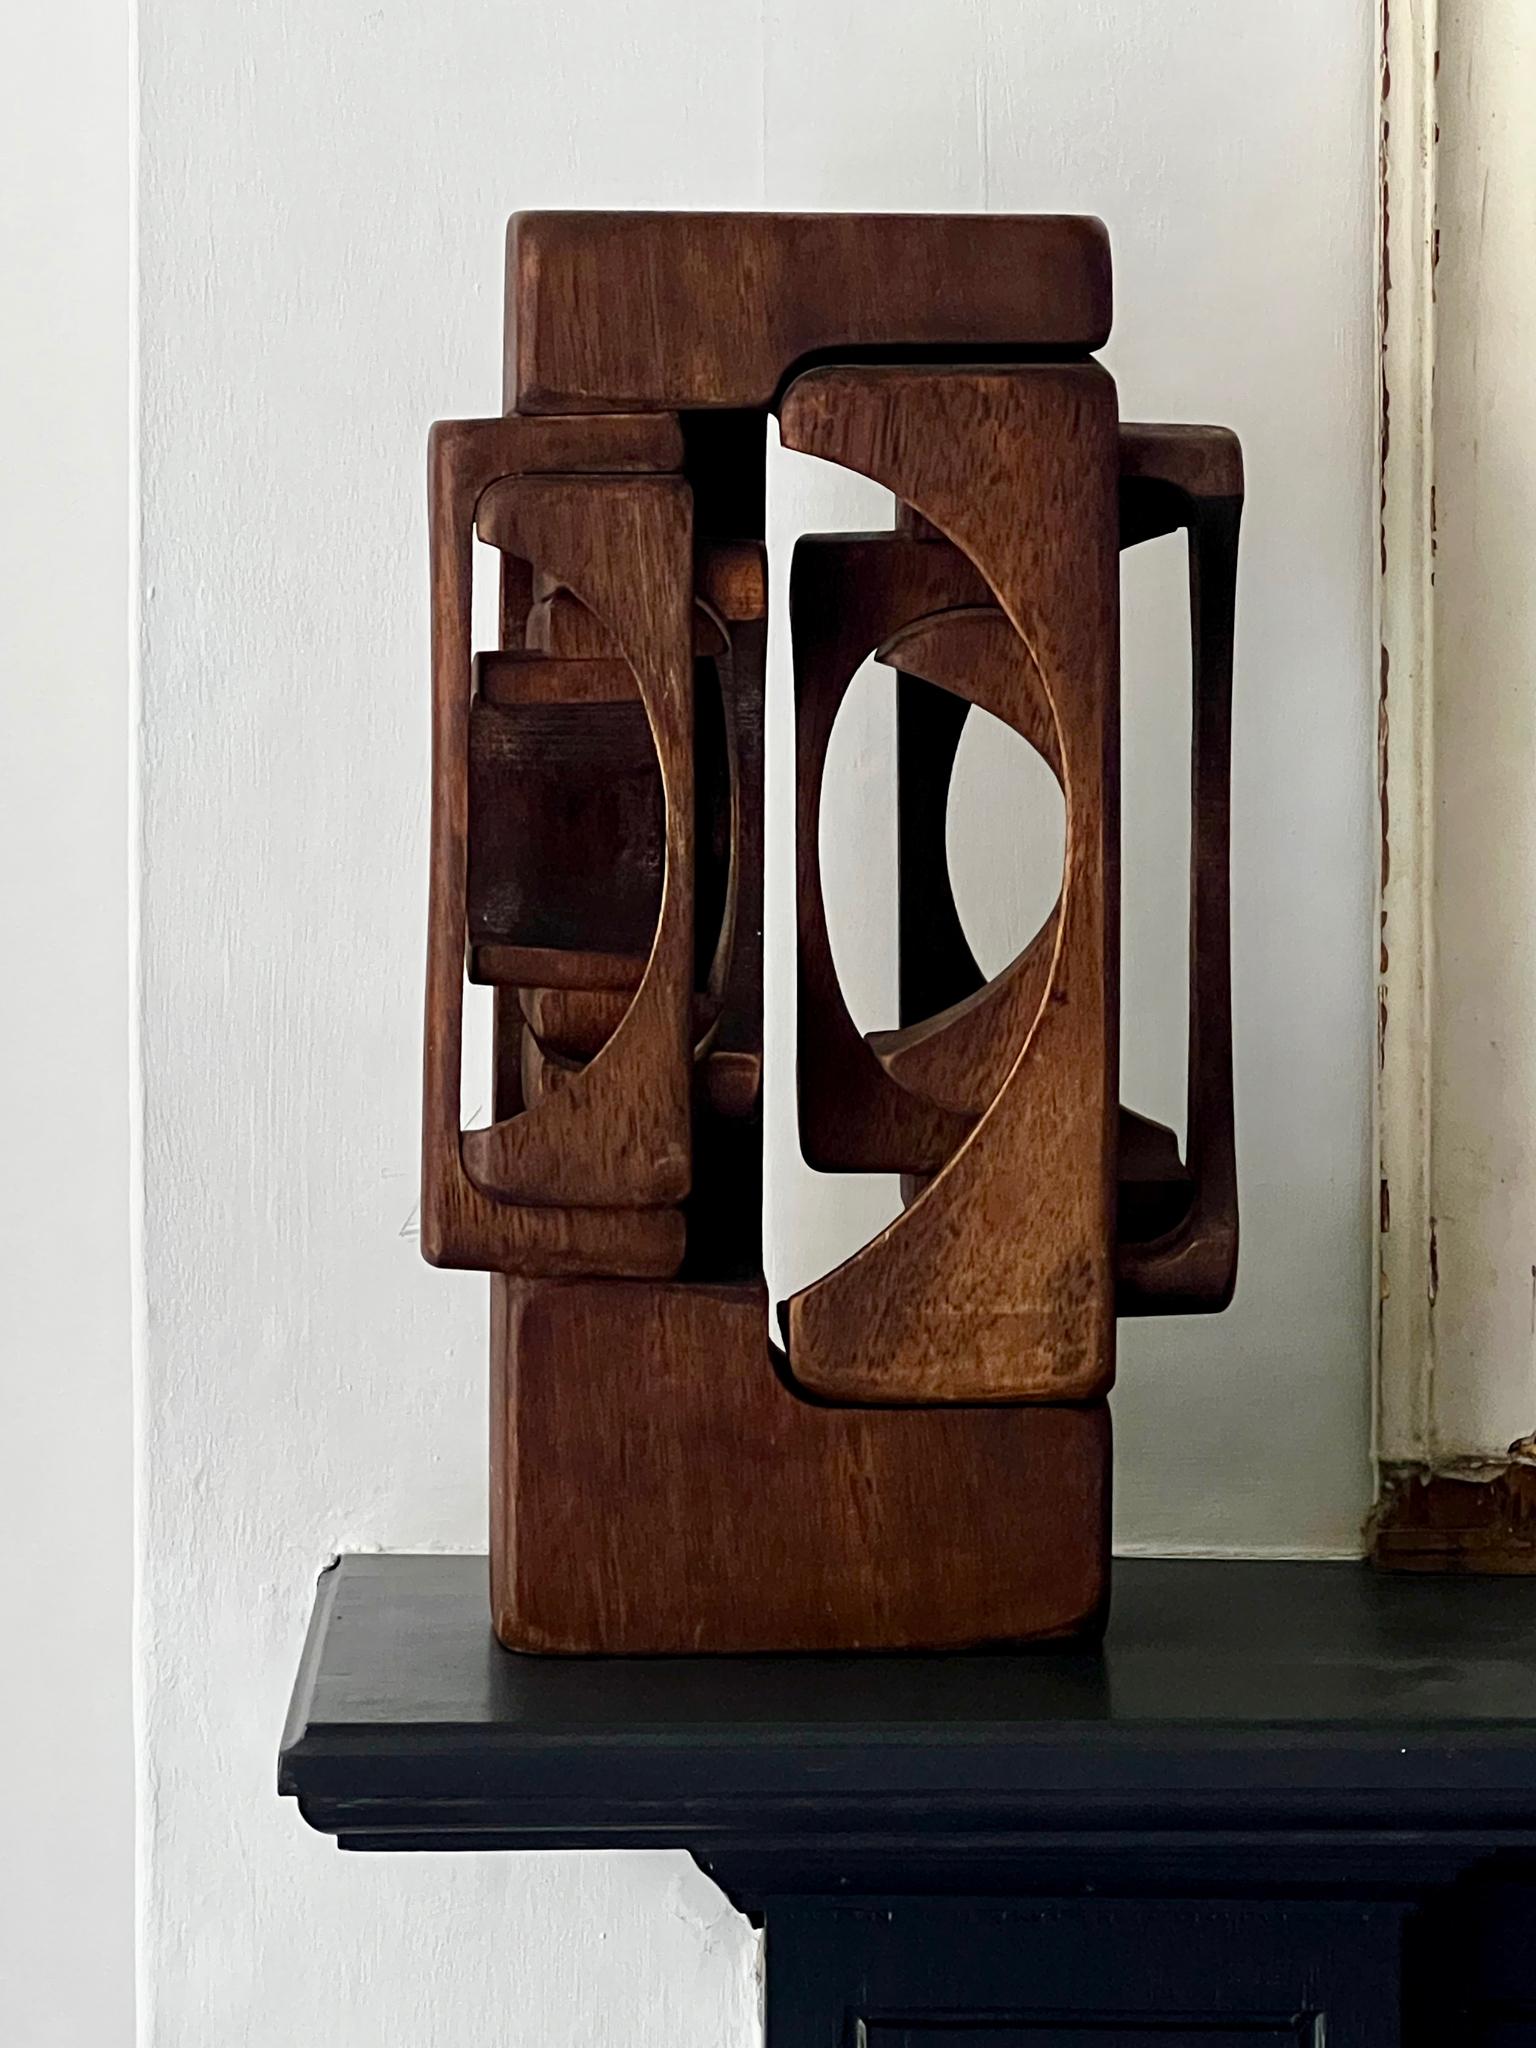 Carved Wooden Sculpture by Brian Willsher, Signed and Dated, England, 1978